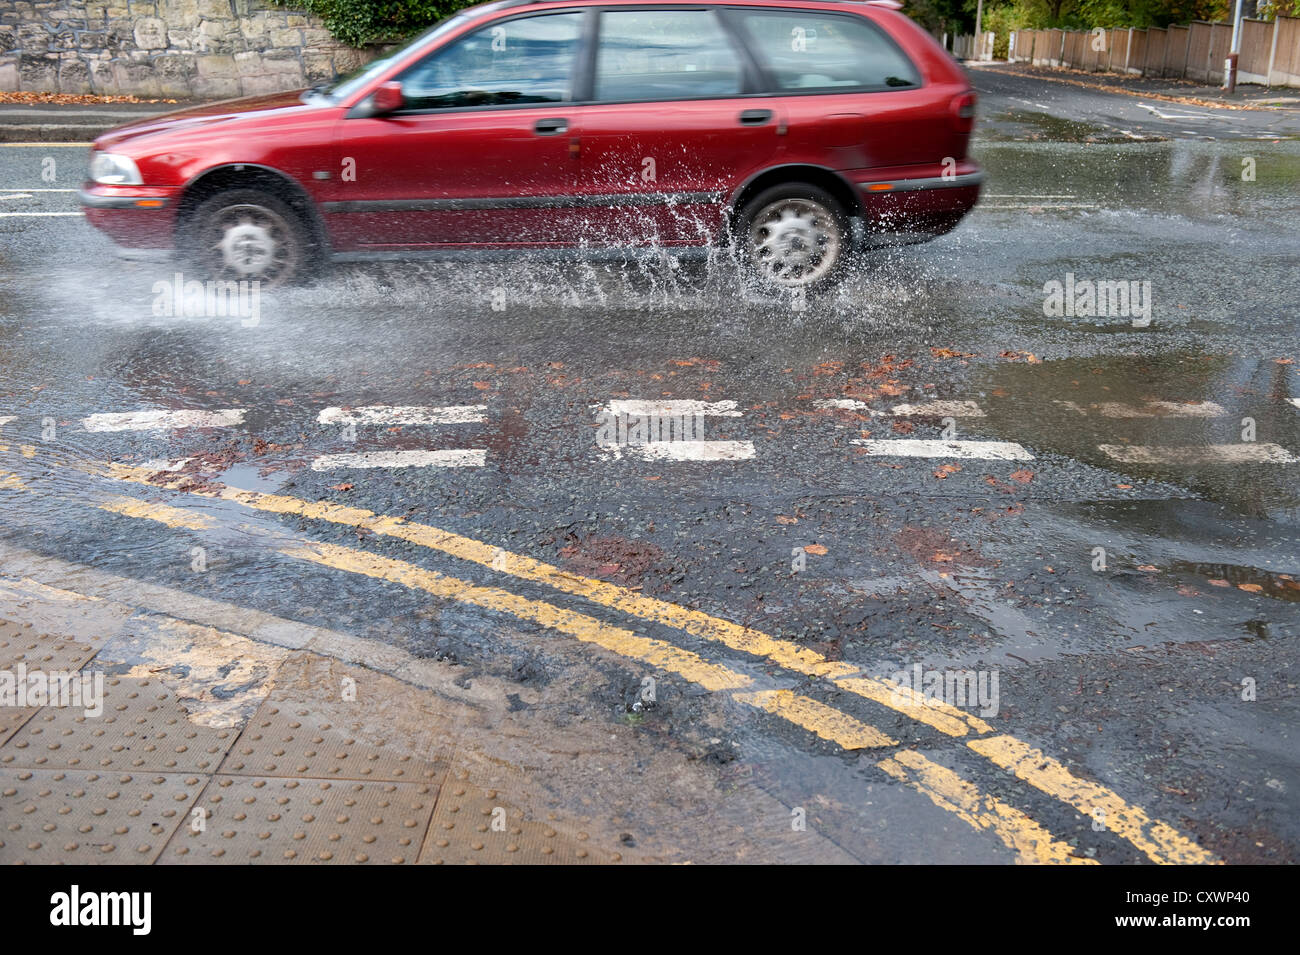 Burst water main pipe flooding road with cars going past Stock Photo